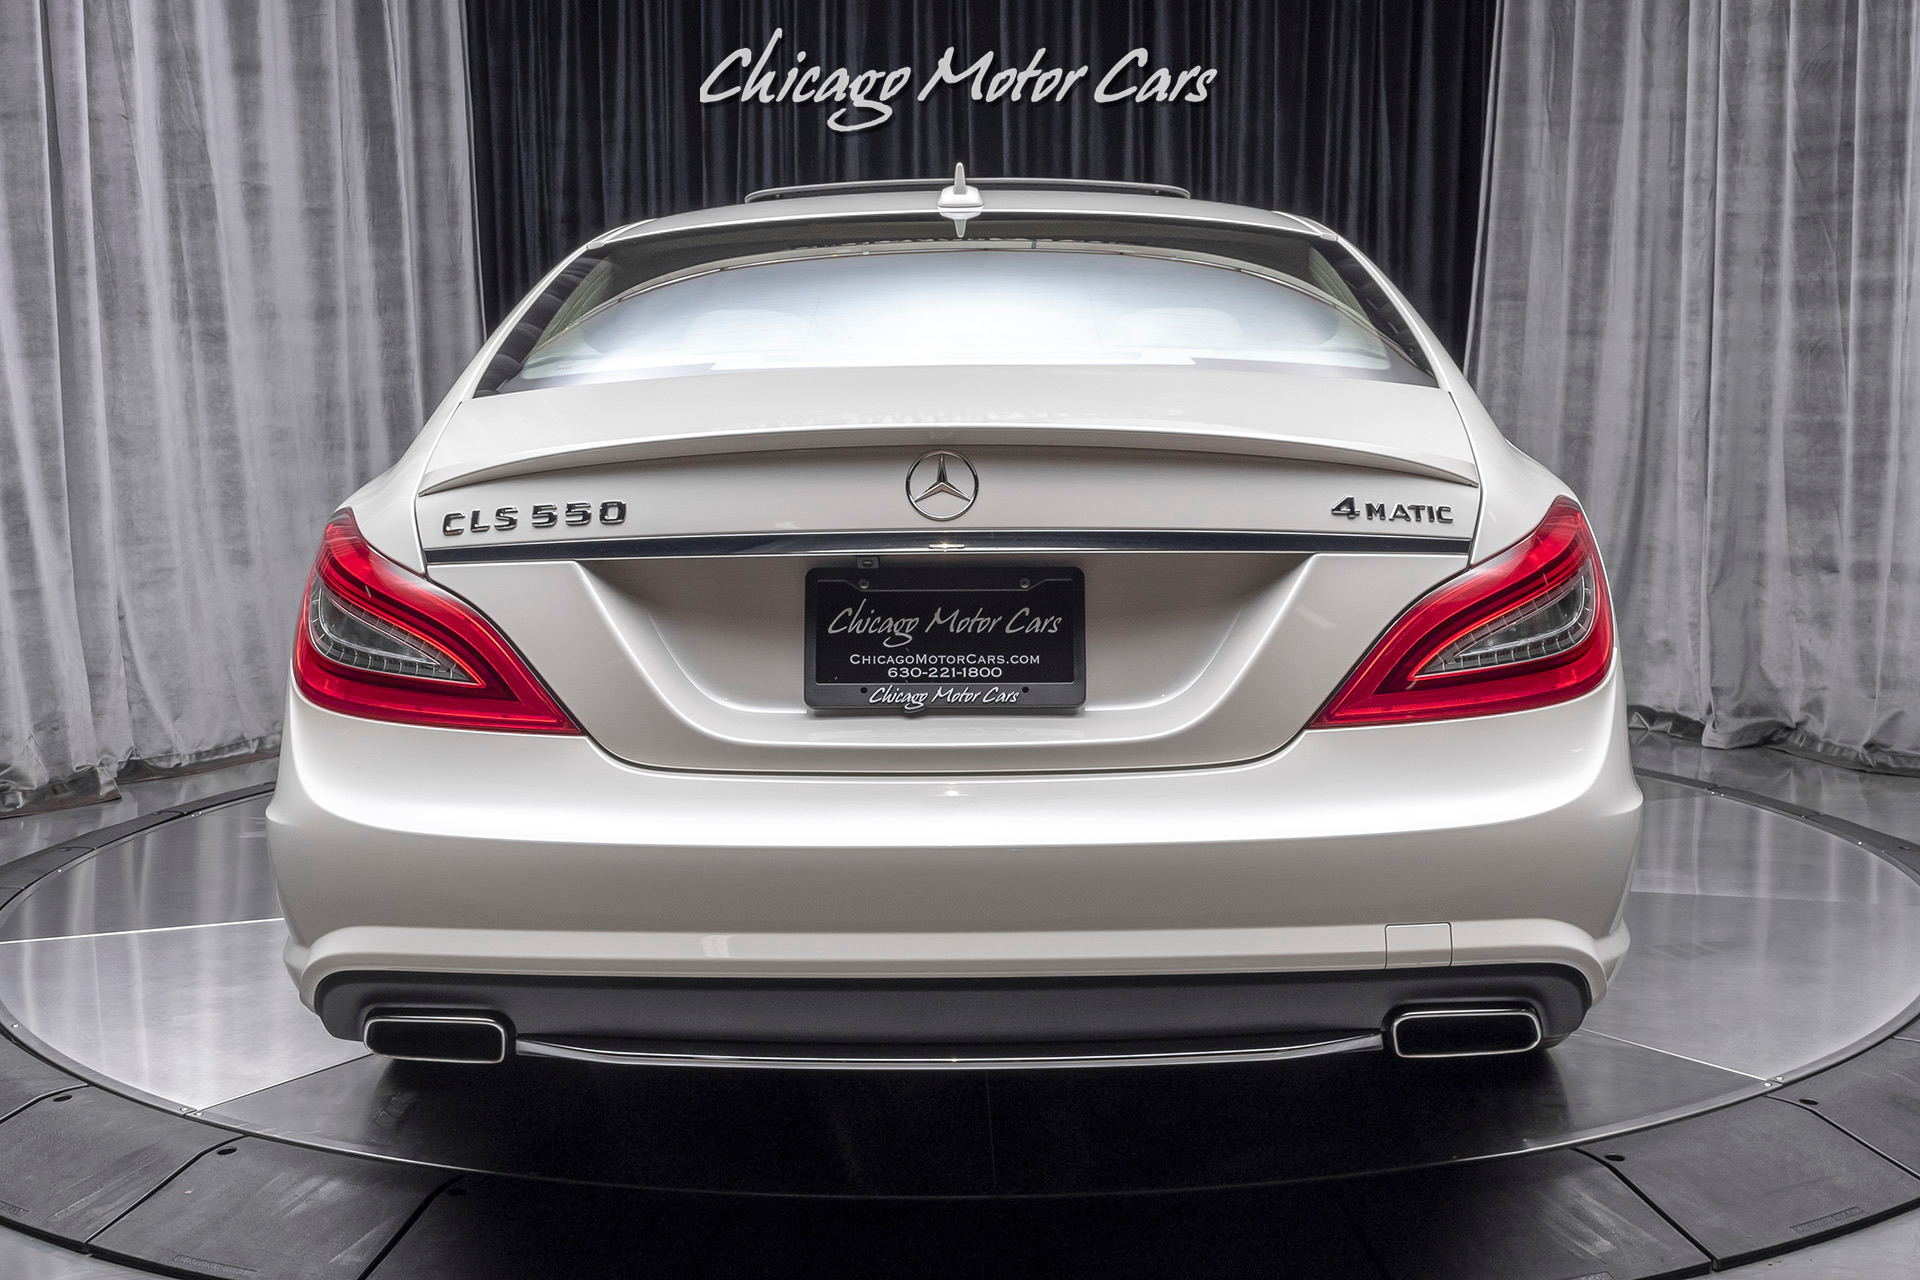 Used-2012-Mercedes-Benz-CLS550-4-Matic-Sedan-Sport-Package-Only-23k-Miles-LOADED